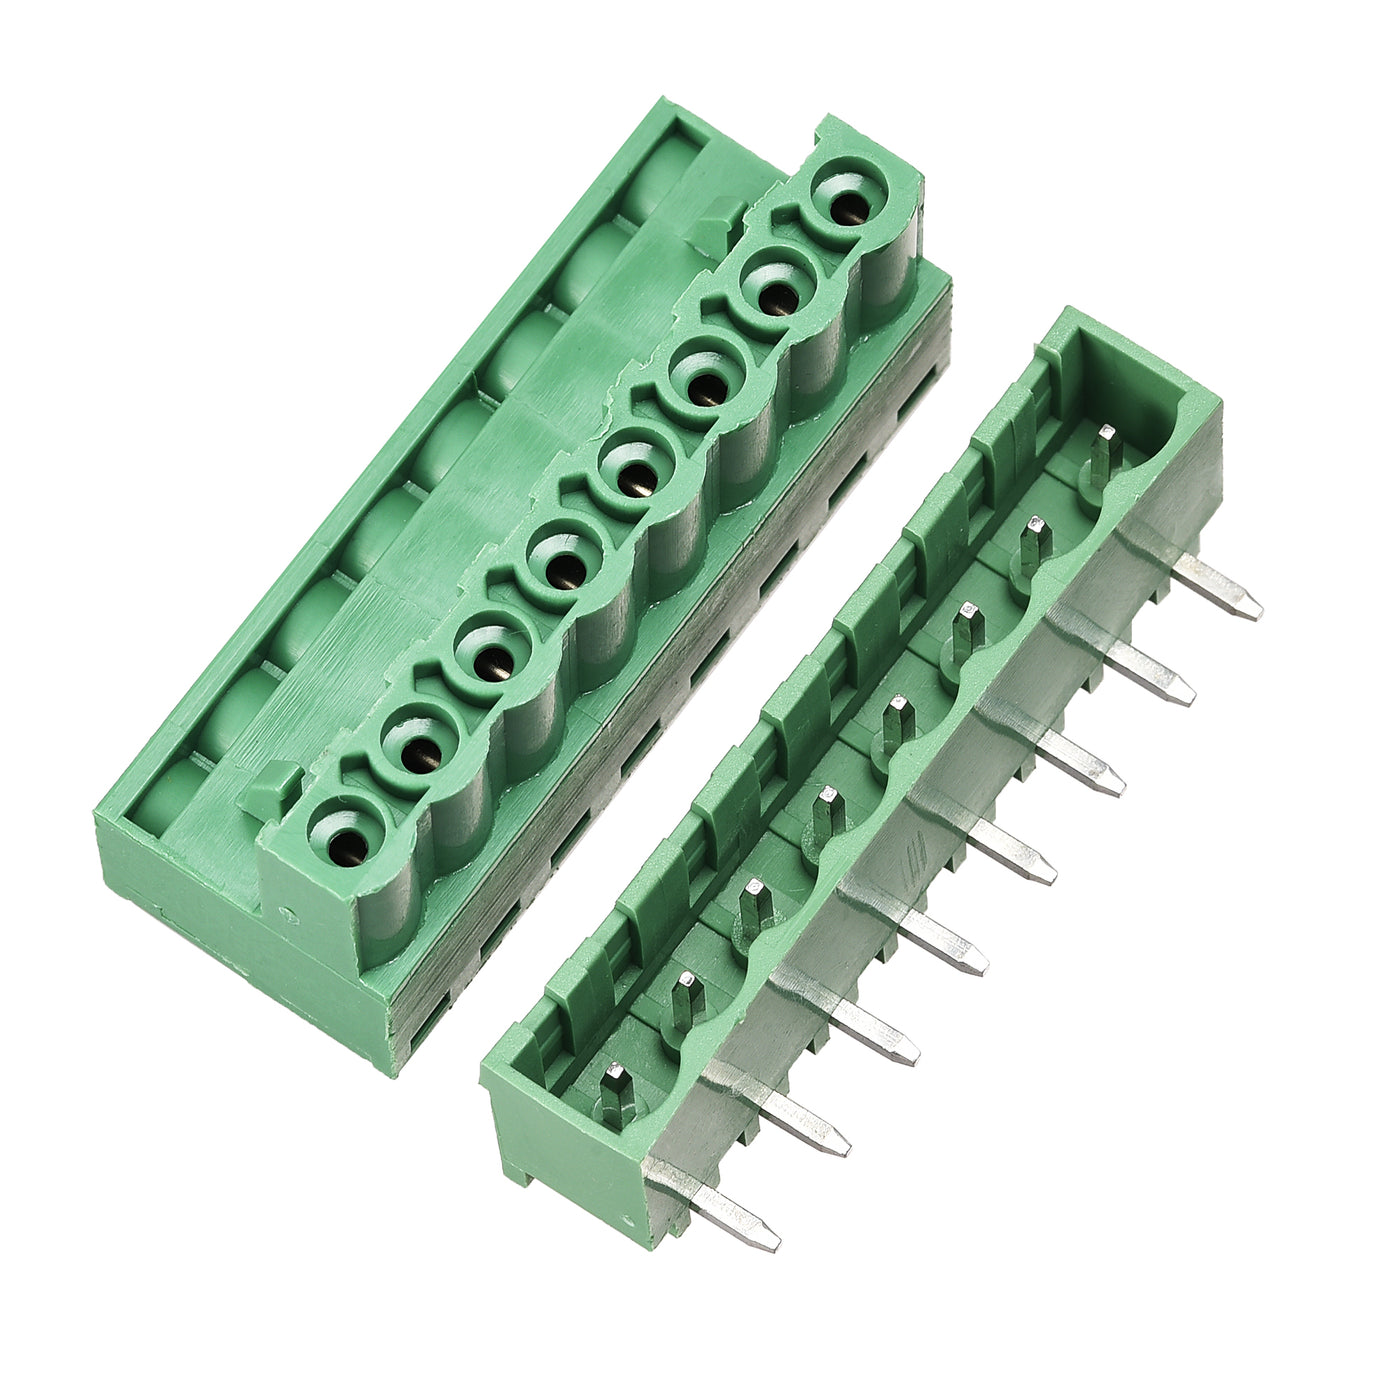 uxcell Uxcell 8-Pin 5.08mm Pitch Right Angle PCB Screw Terminal Block Connector 5 Sets